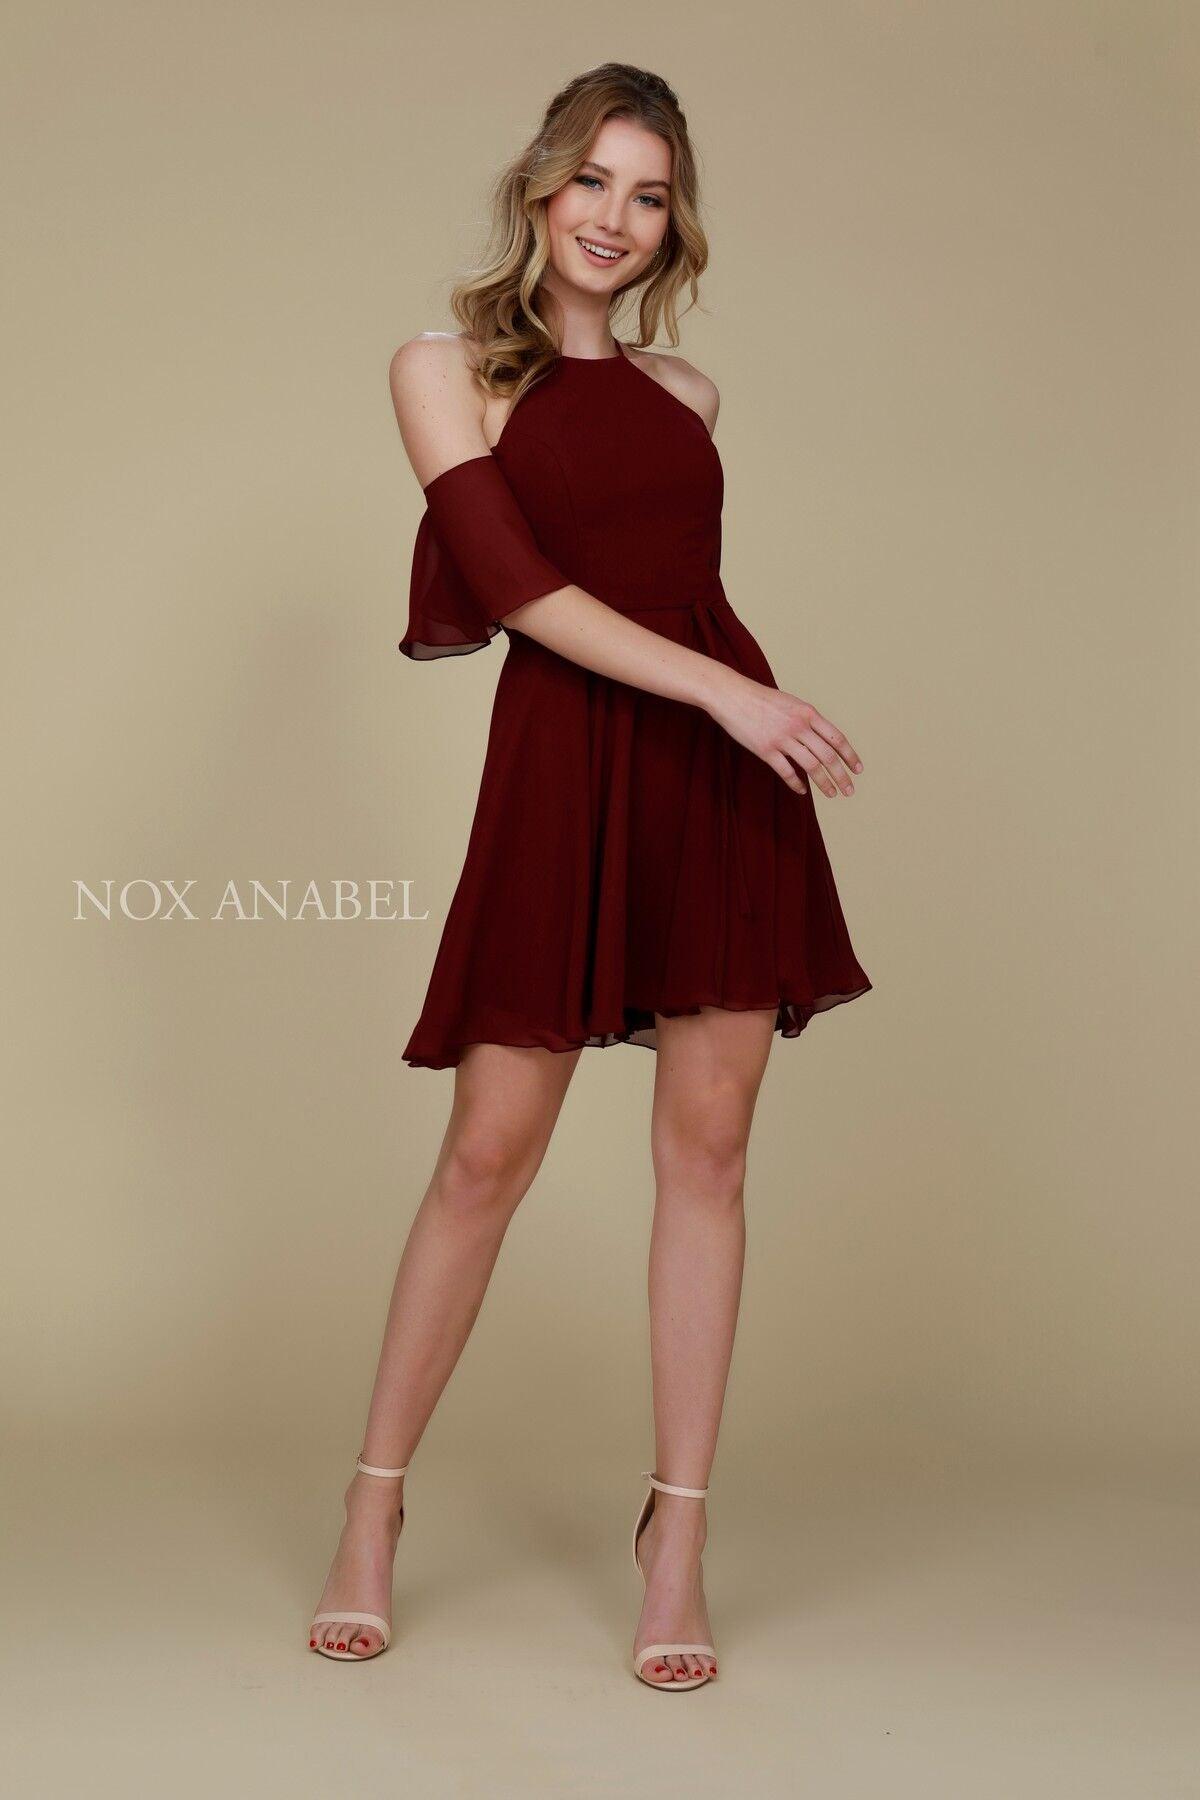 Homecoming Short Cocktail Party Chiffon Dress - The Dress Outlet Nox Anabel